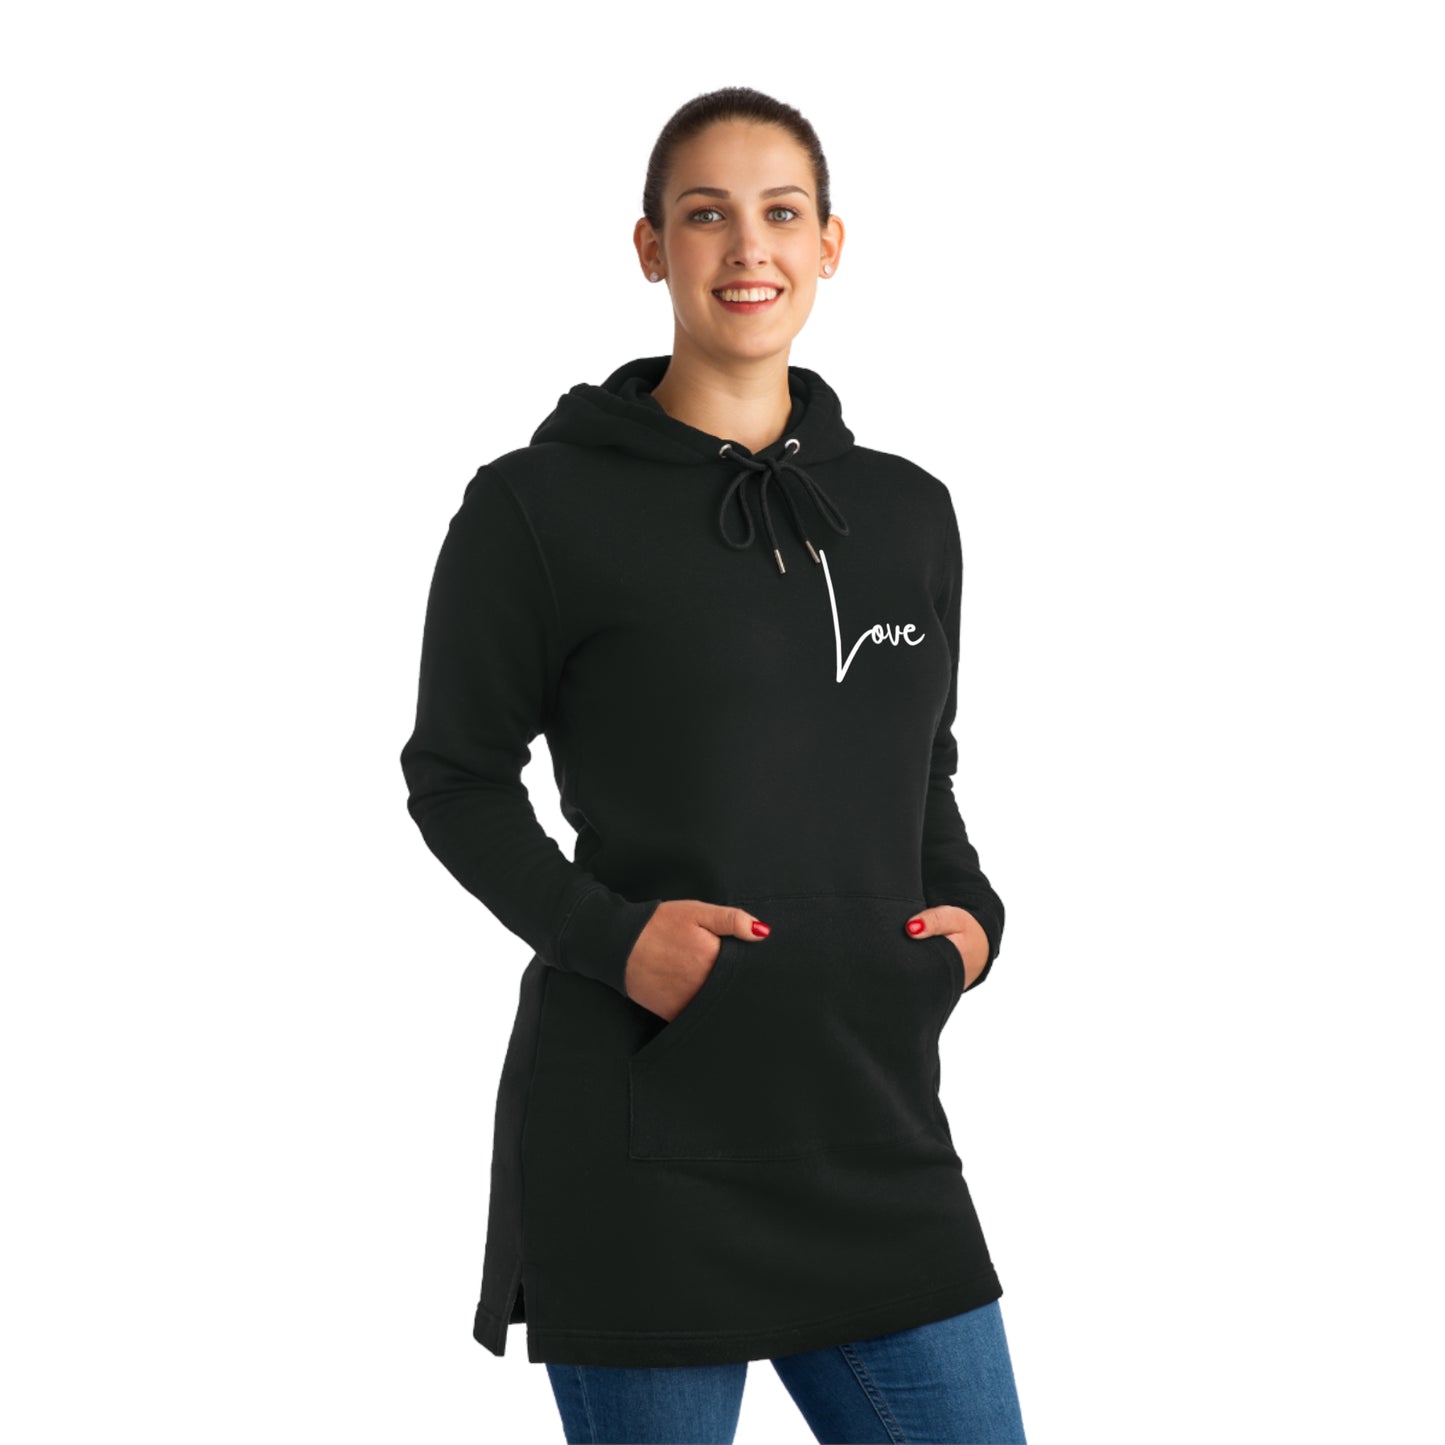 All About Love Hoodie Dress